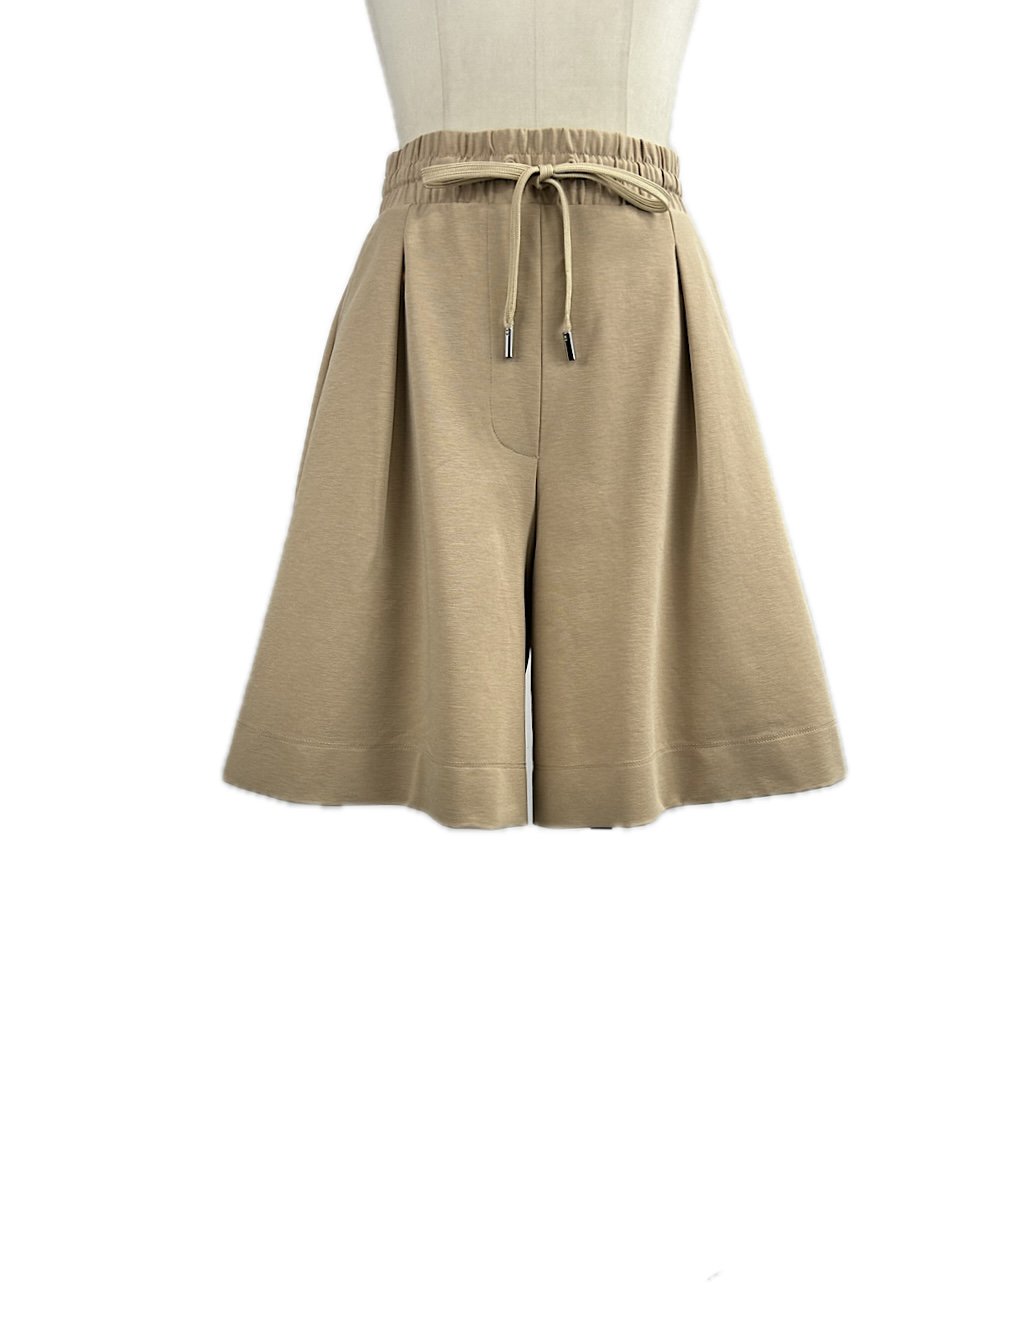 <img class='new_mark_img1' src='https://img.shop-pro.jp/img/new/icons6.gif' style='border:none;display:inline;margin:0px;padding:0px;width:auto;' />MAXMARA WEEKEND / SHORT PANTS